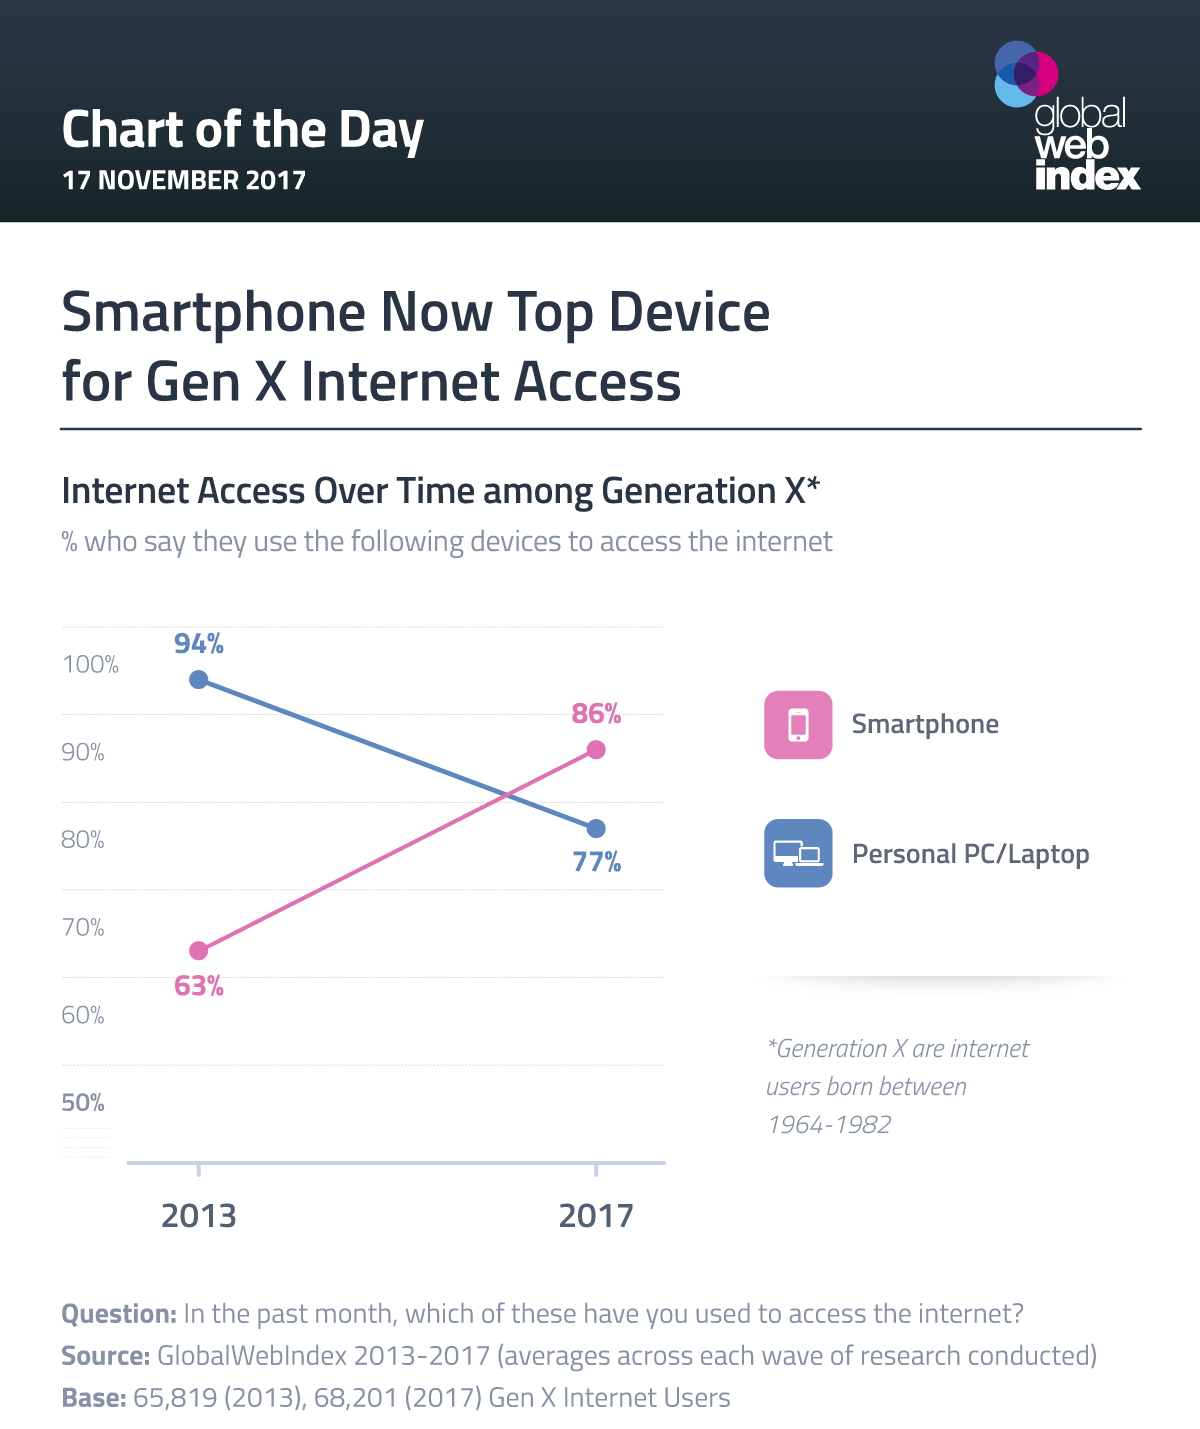 Smartphone Now Top Device for Gen X Internet Access